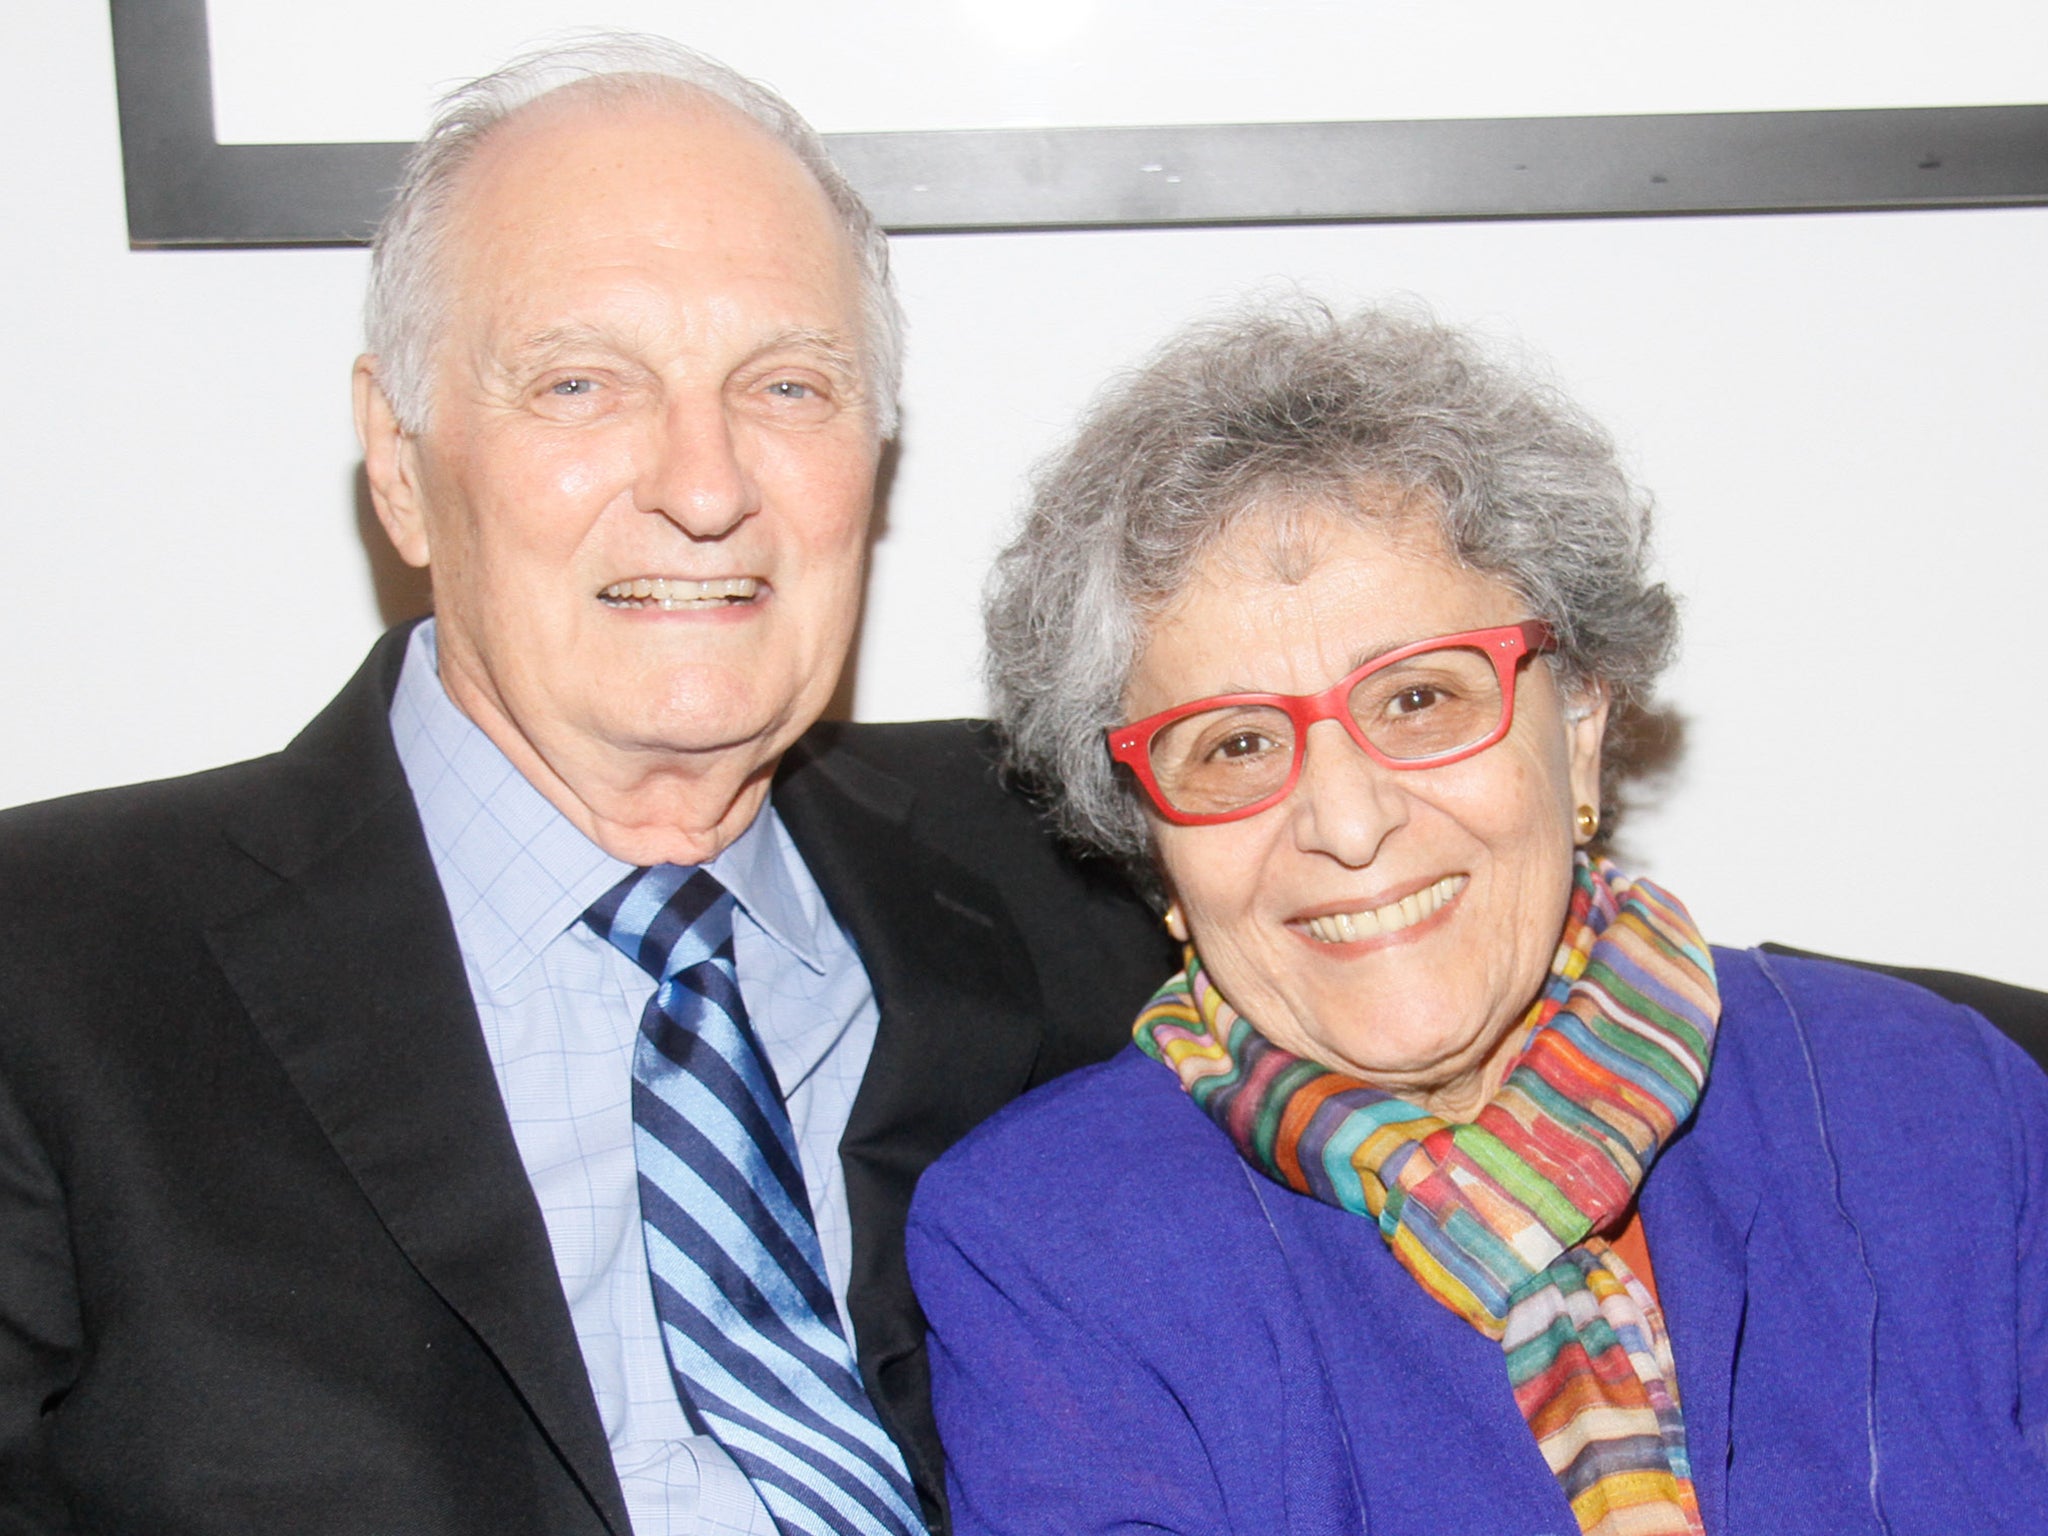 Alan Alda and his wife Arlene, who first locked eyes over a rum cake, in 2014